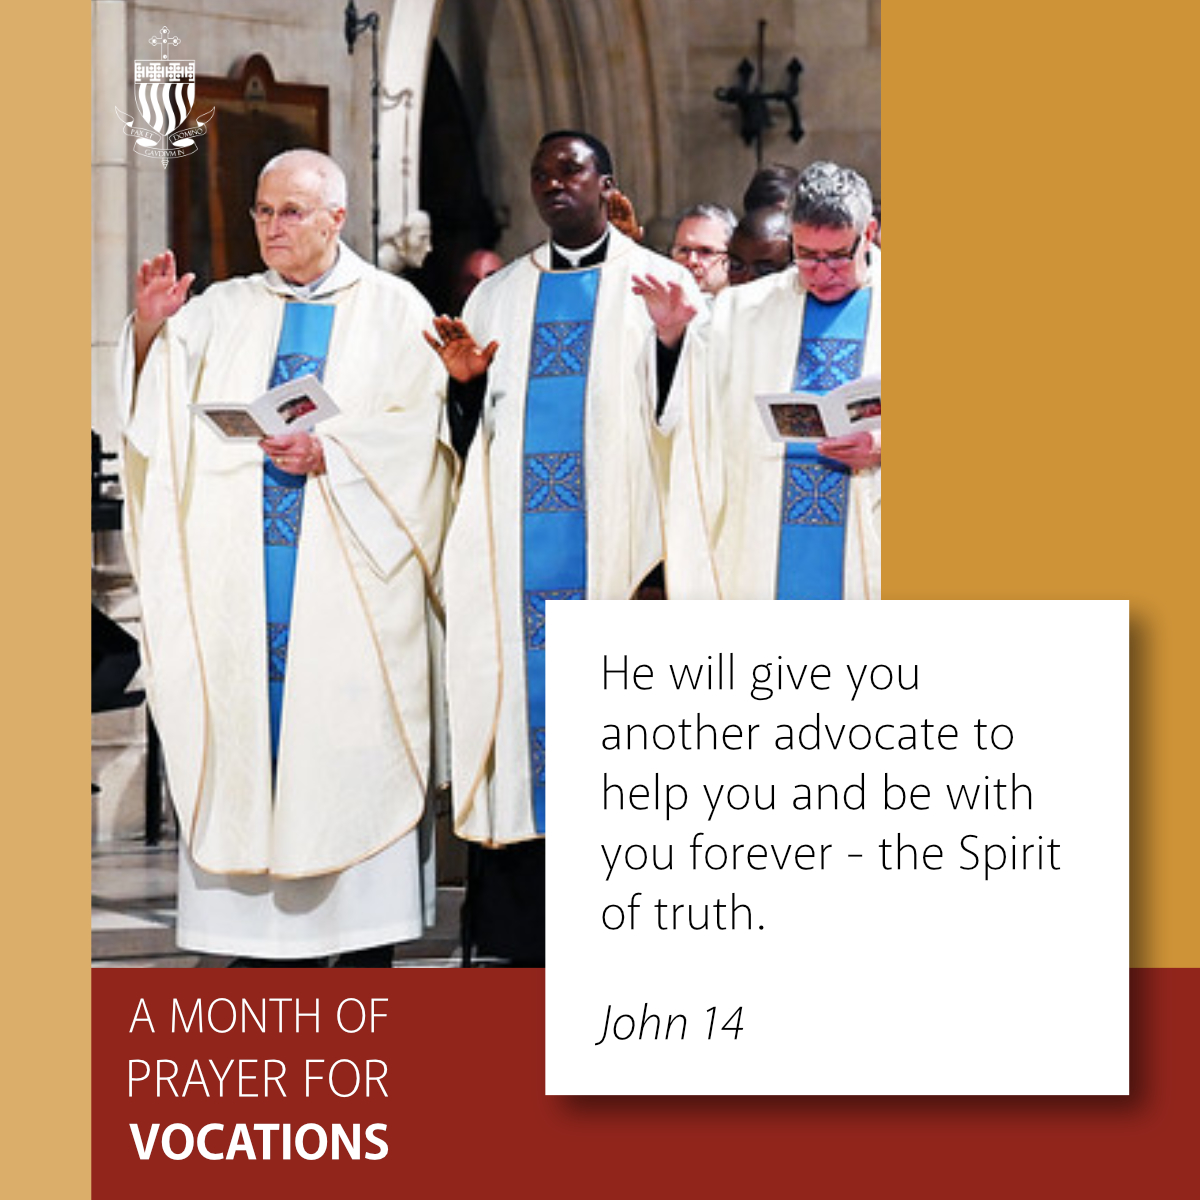 For 4 weeks up to Pentecost this year our Diocese is invited to pray for vocations. This week, let’s read about the Spirit of truth (Jn 14:15-21) and pray for young people to have the gift of discernment in a changing world. For more about vocations: abdiocese.org.uk/faith/vocations